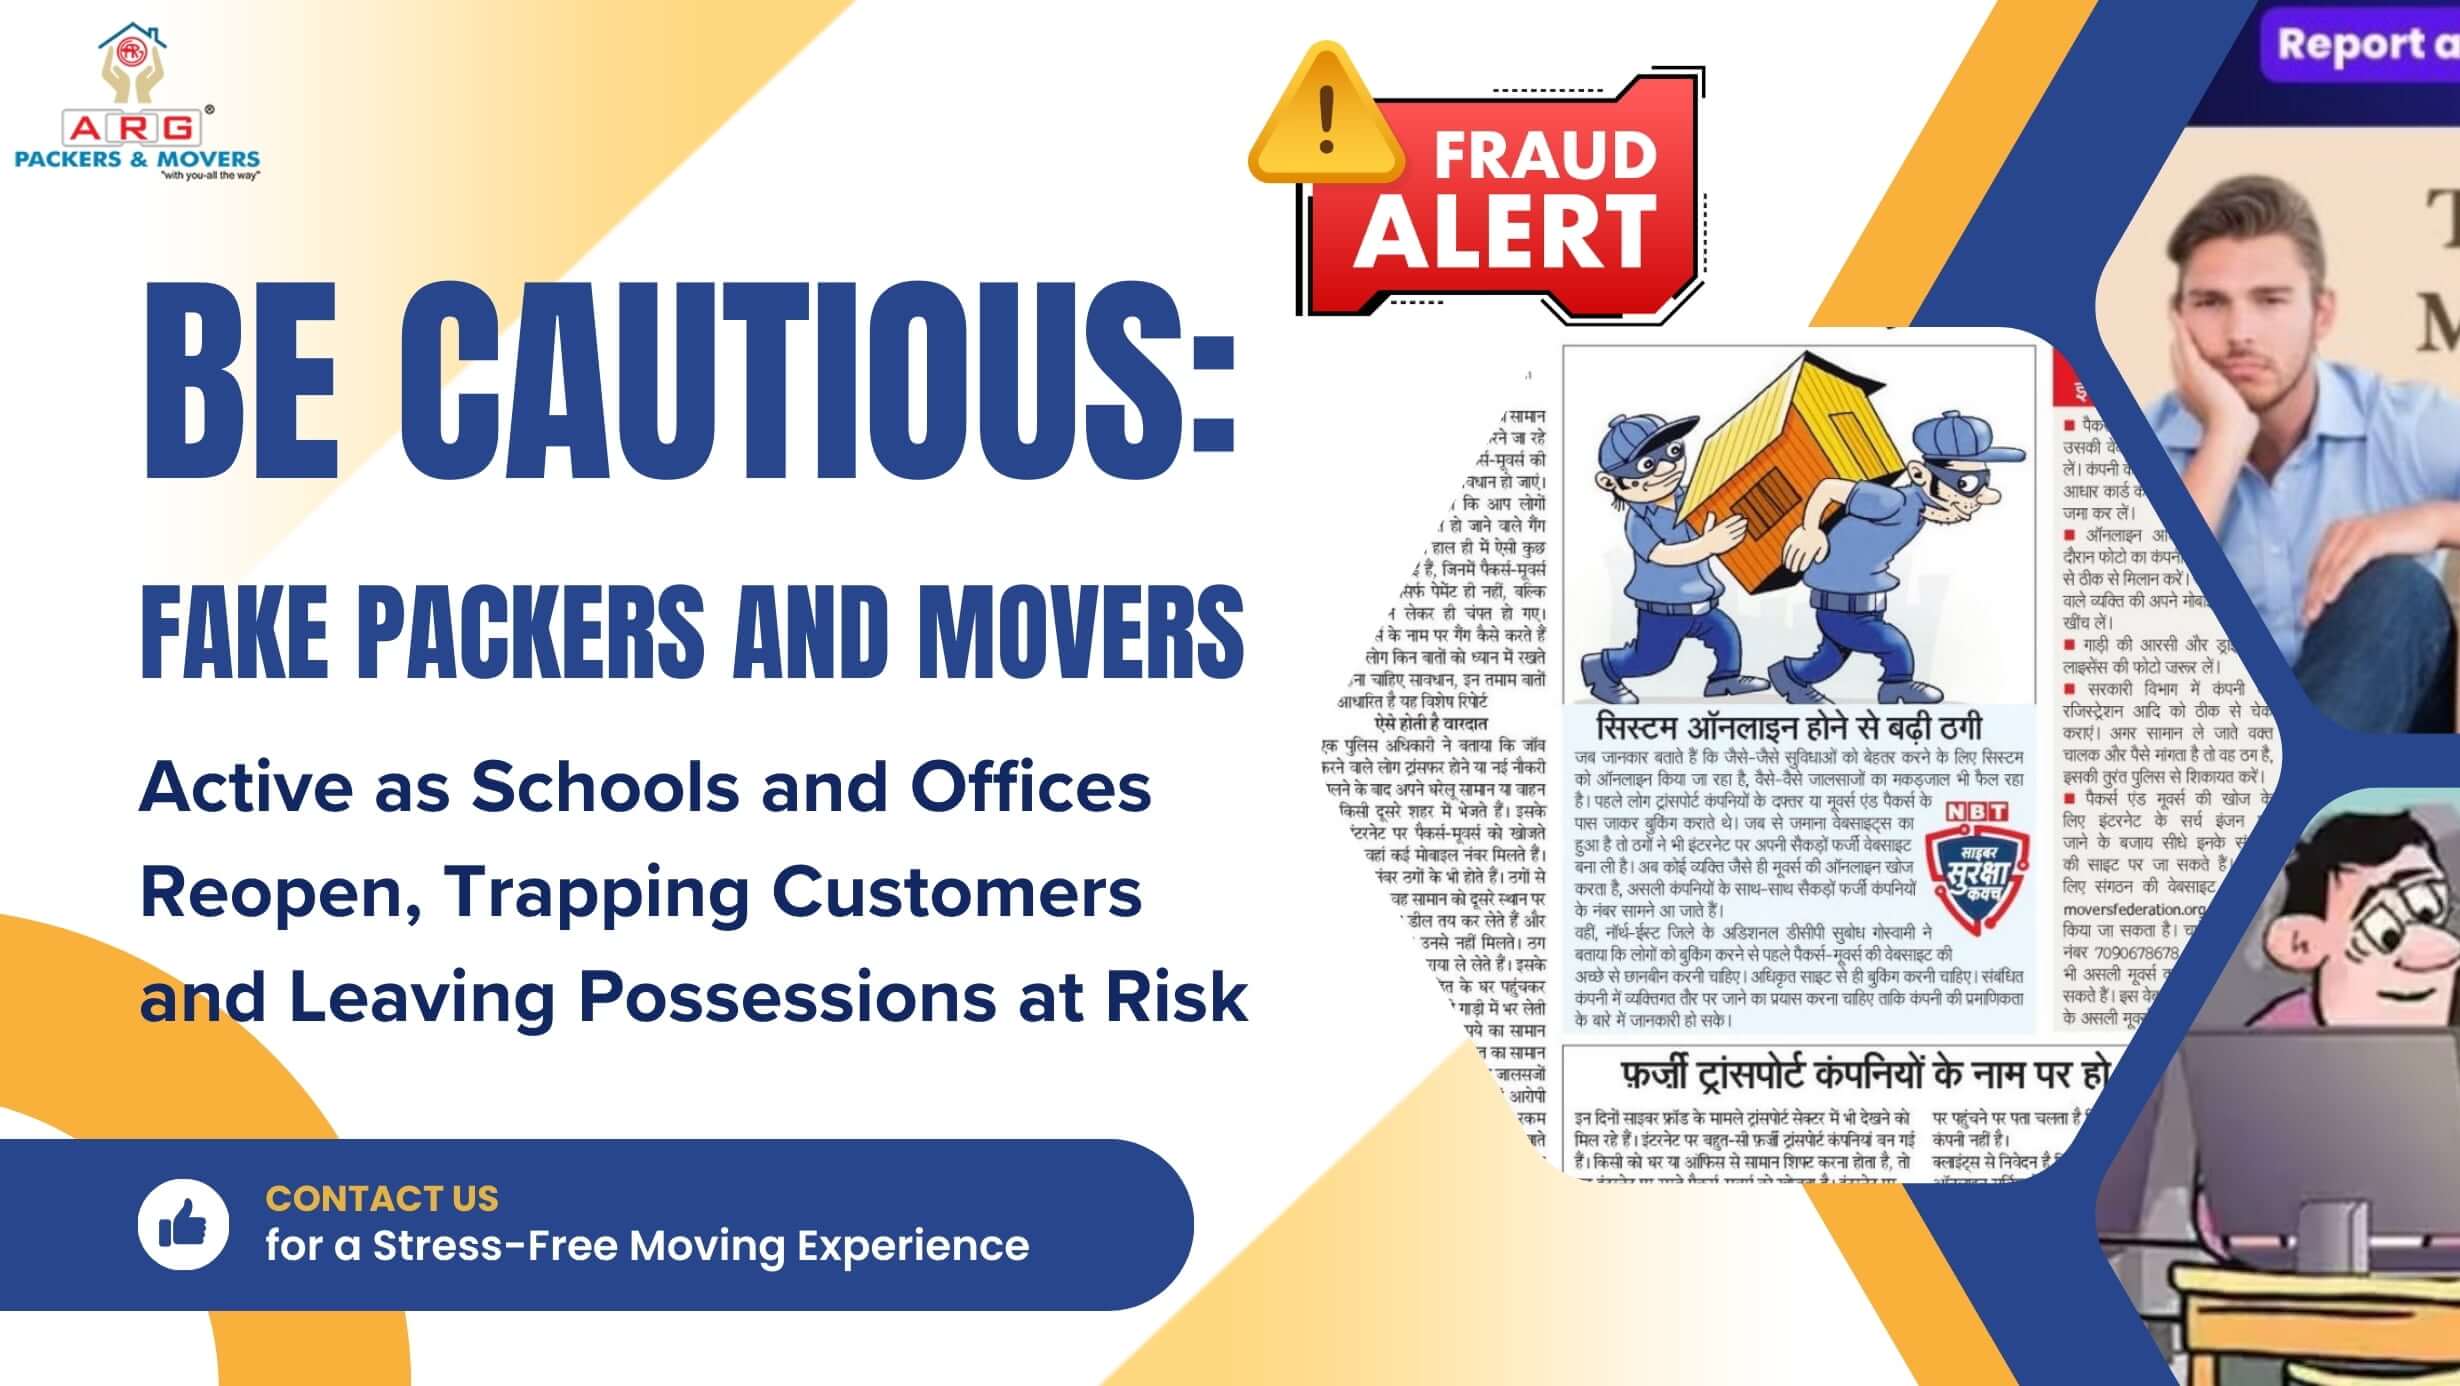 Beware of Fake Movers and Packers